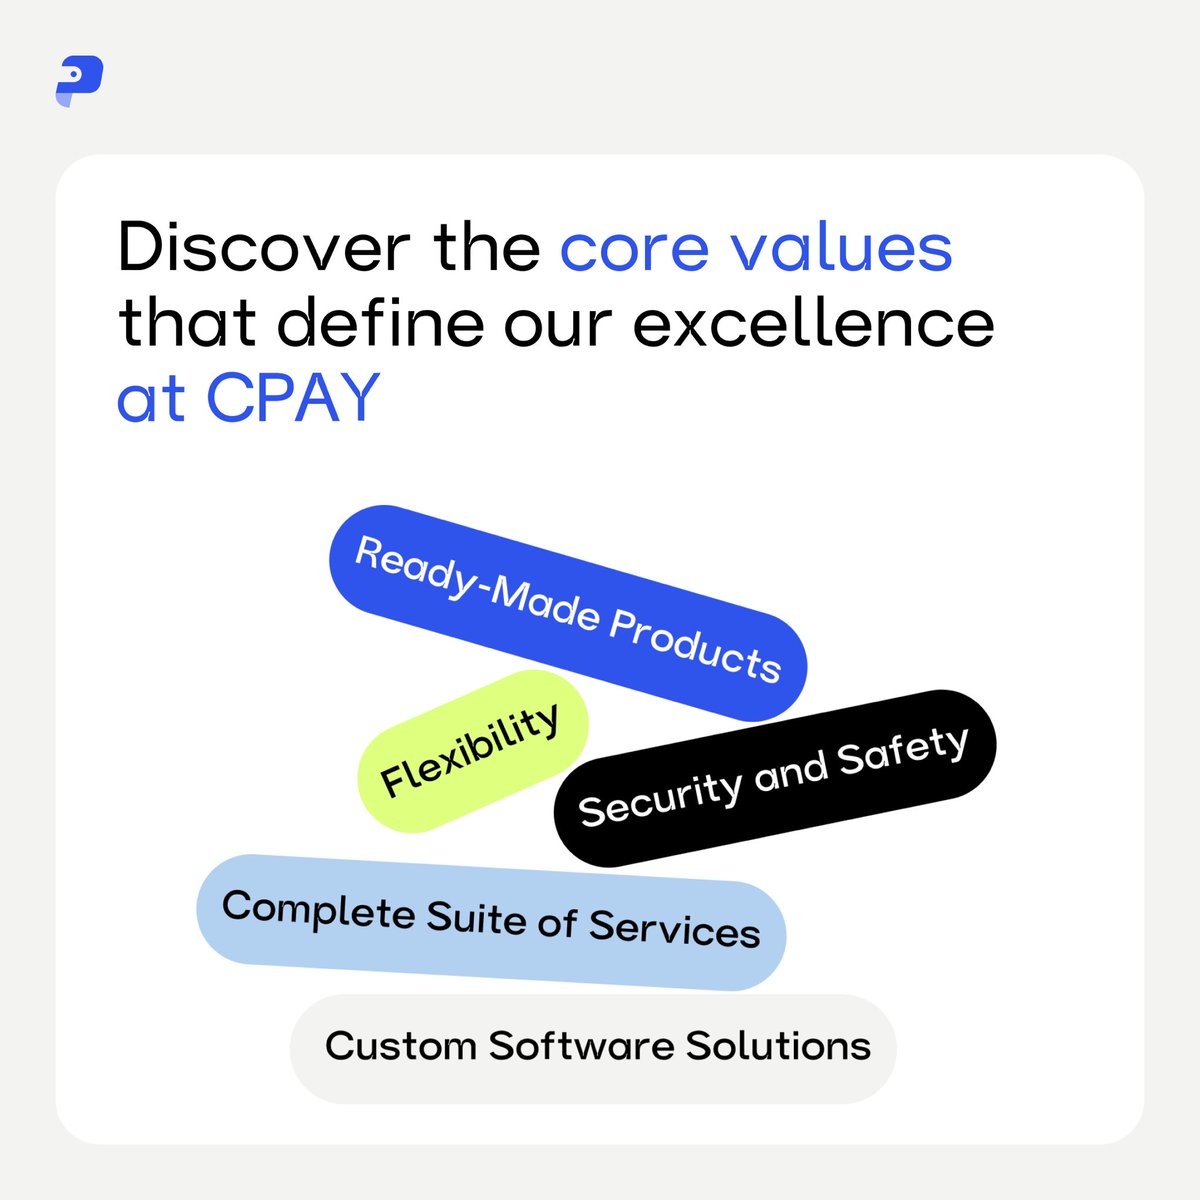 🚀 Discover the core values that define our excellence at CPAY! Learn more at cpay.world

Complete Suite of Services

Ready-Made Products

Security and Safety

Flexibility

Custom Software Solutions

#CryptoSolutions #BusinessGrowth #Security #Flexibility